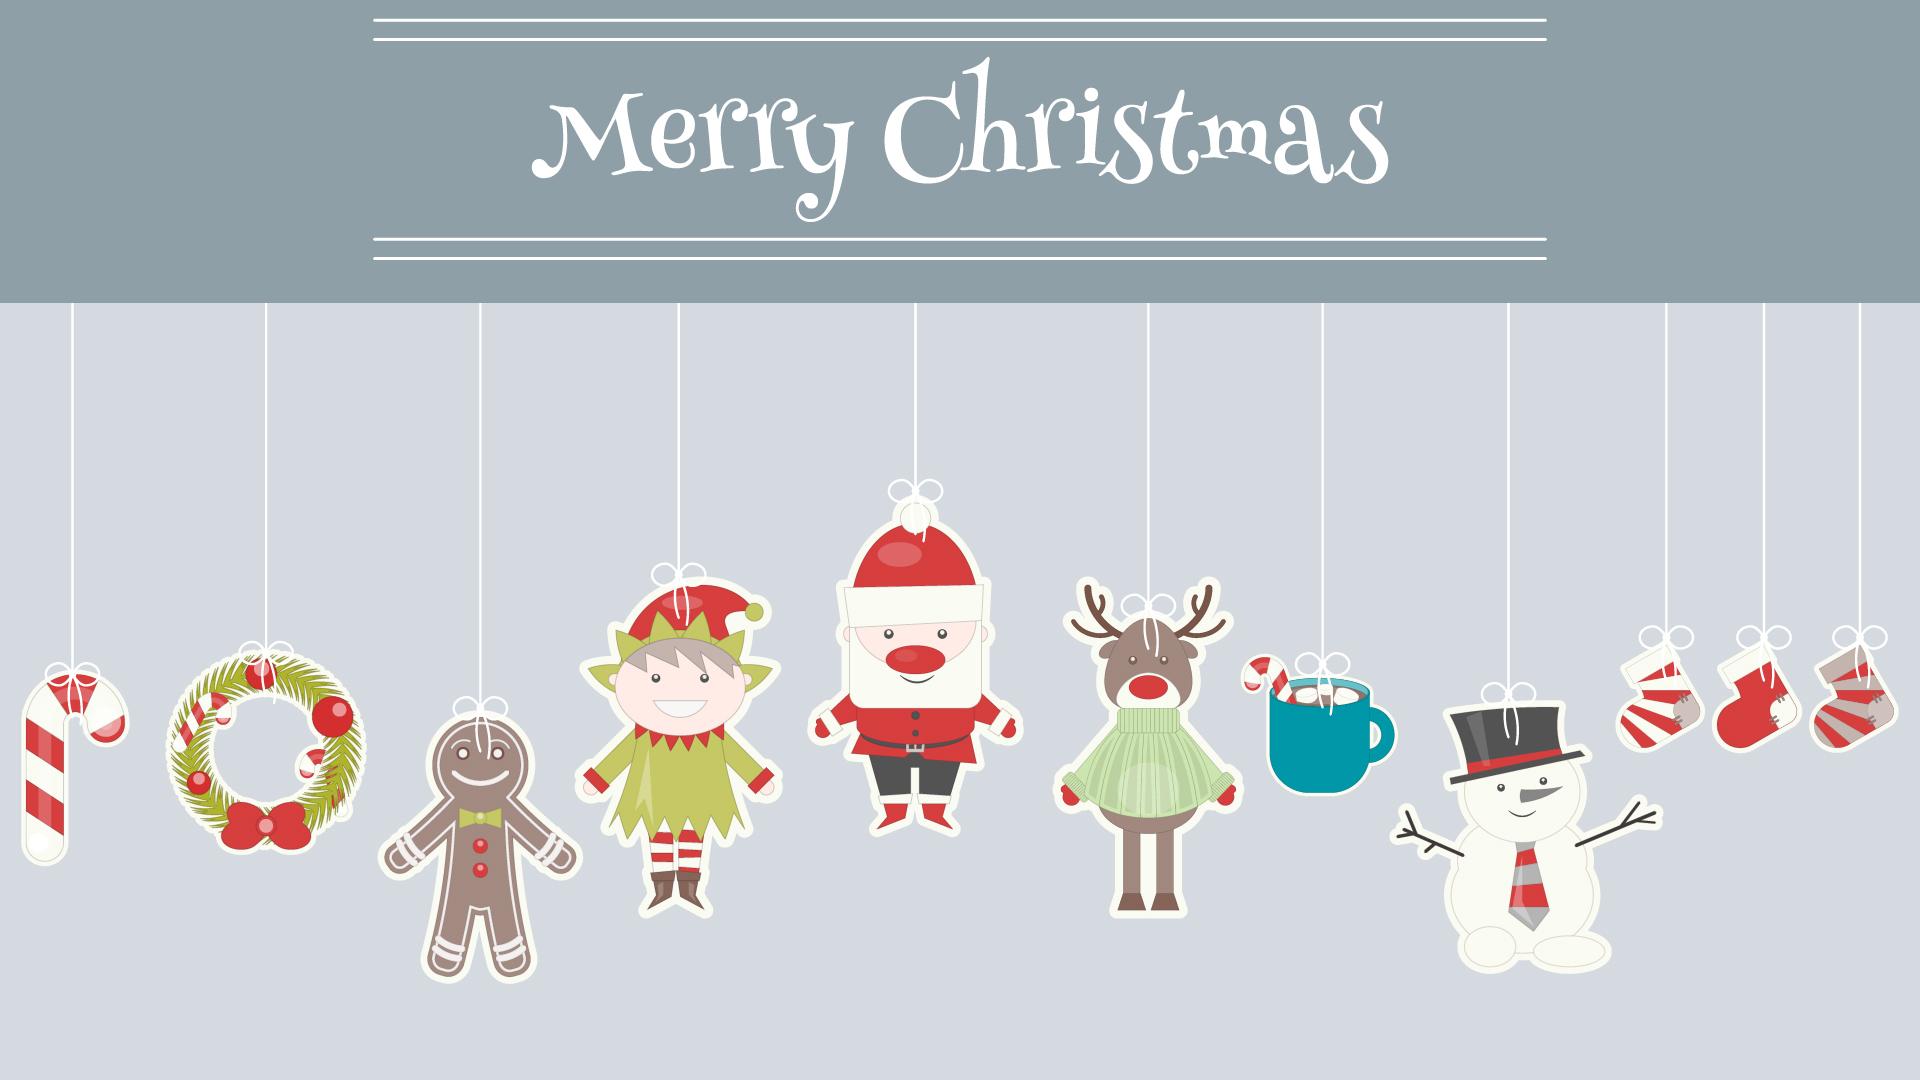 Free Festive Christmas Wallpaper for Laptops and Devices